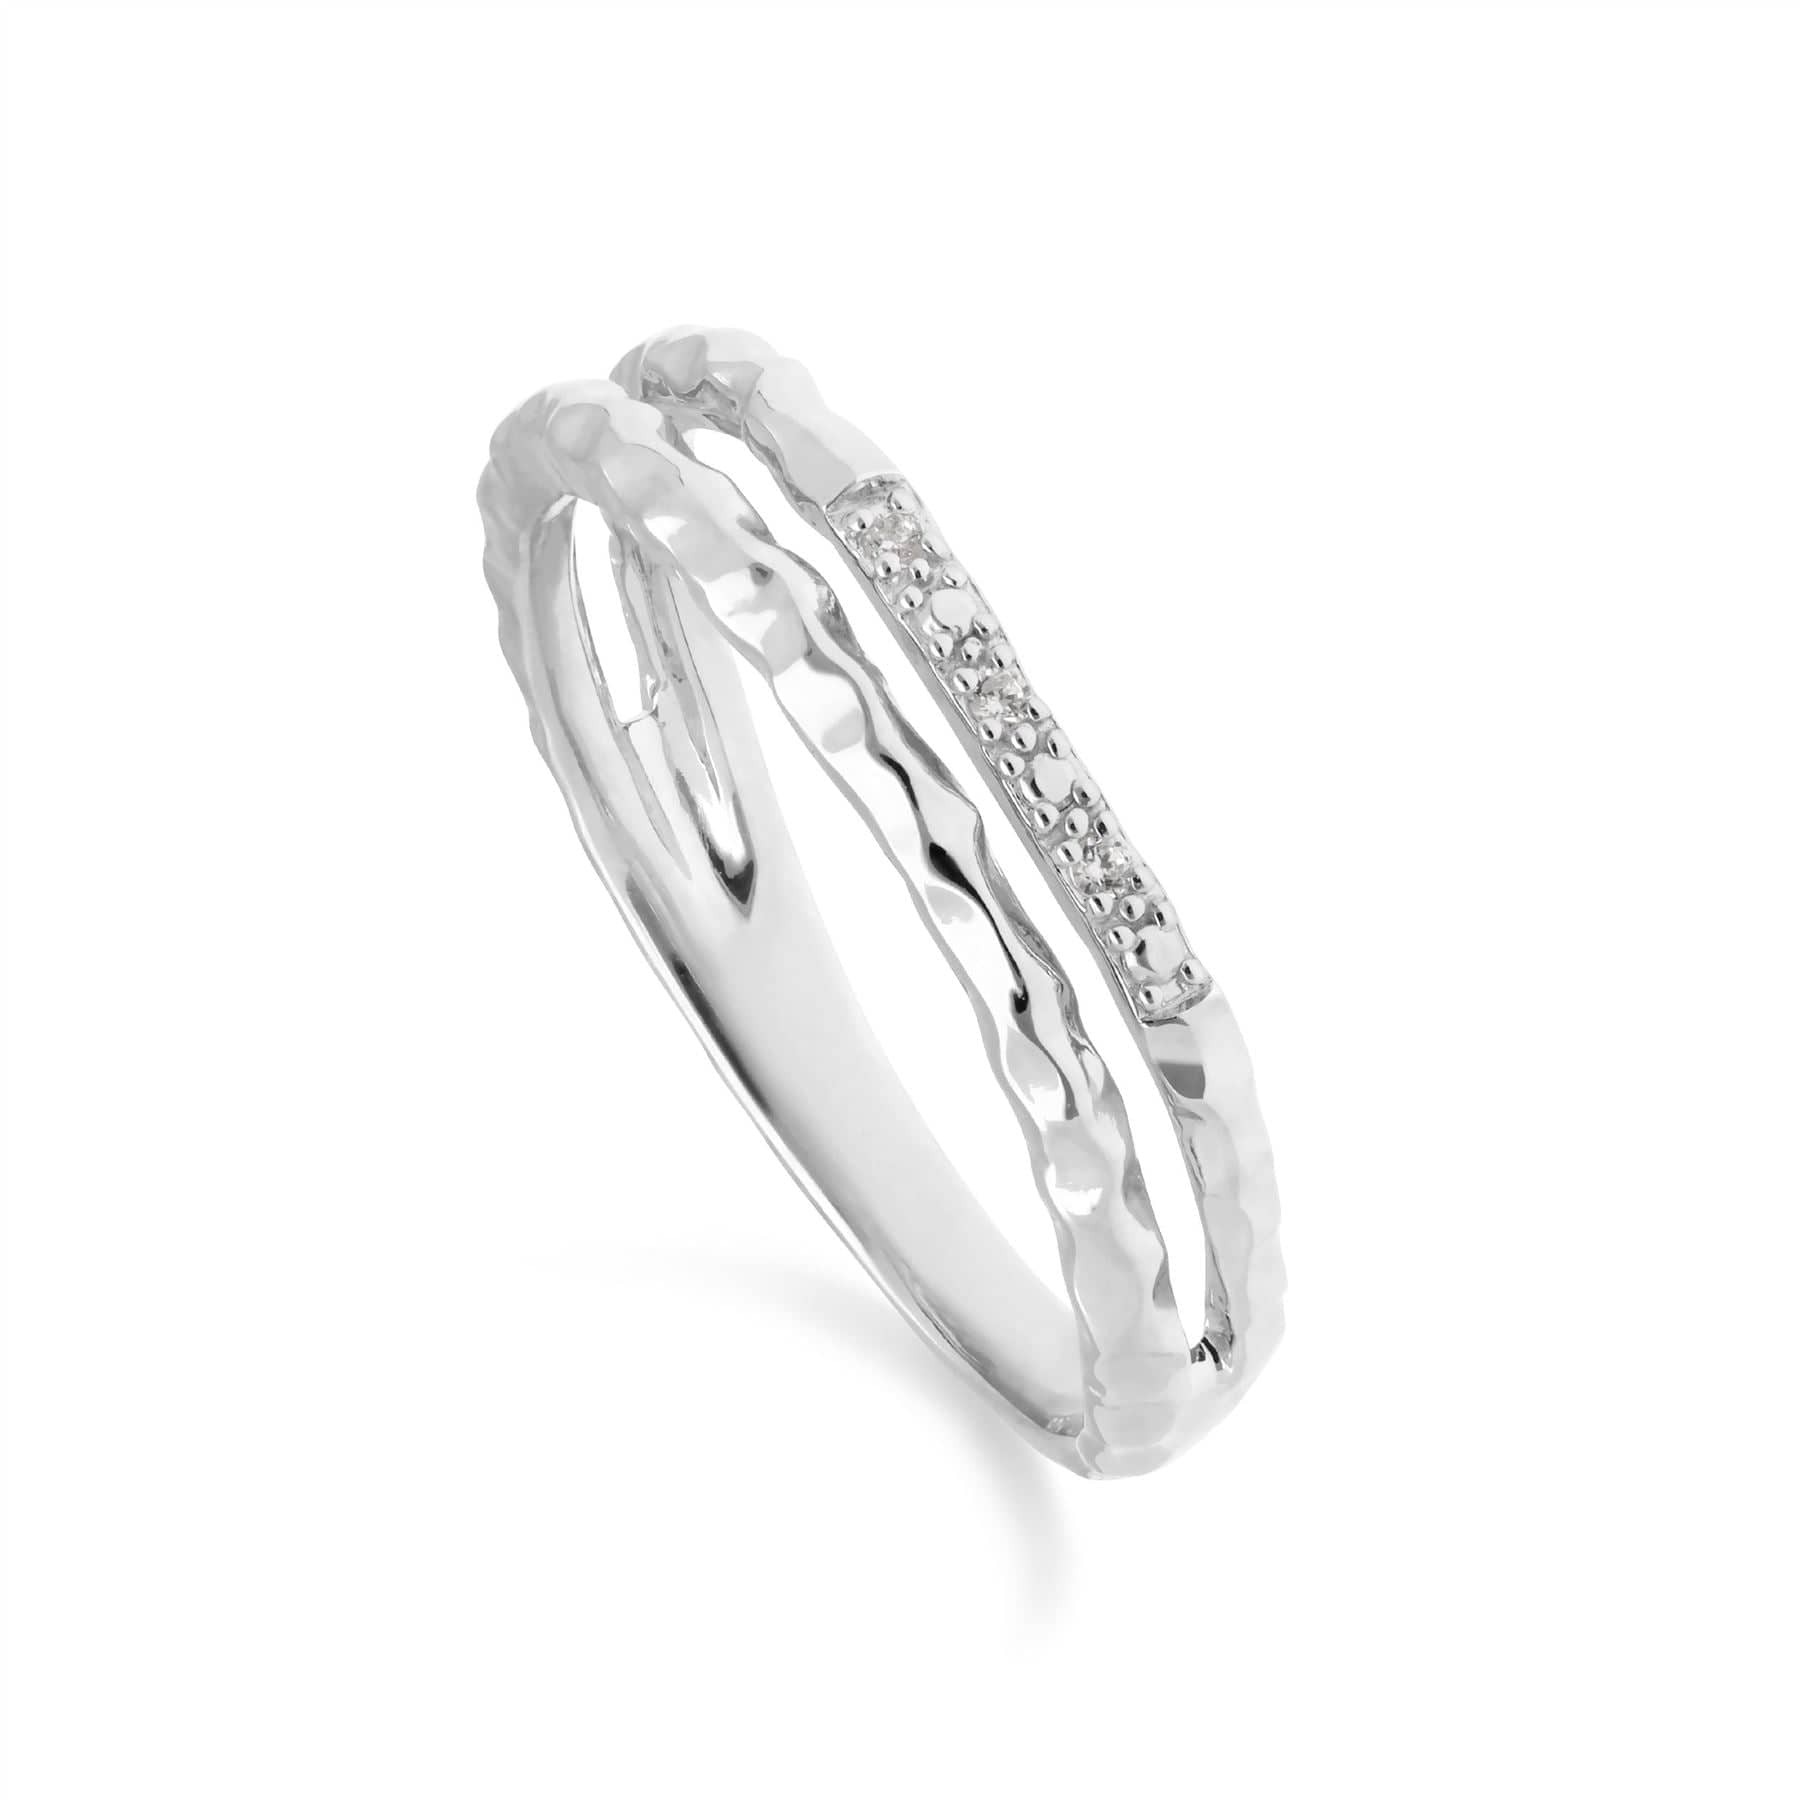 162R0395019 Diamond Pavé Hammered Double Band Ring in 9ct White Gold 1